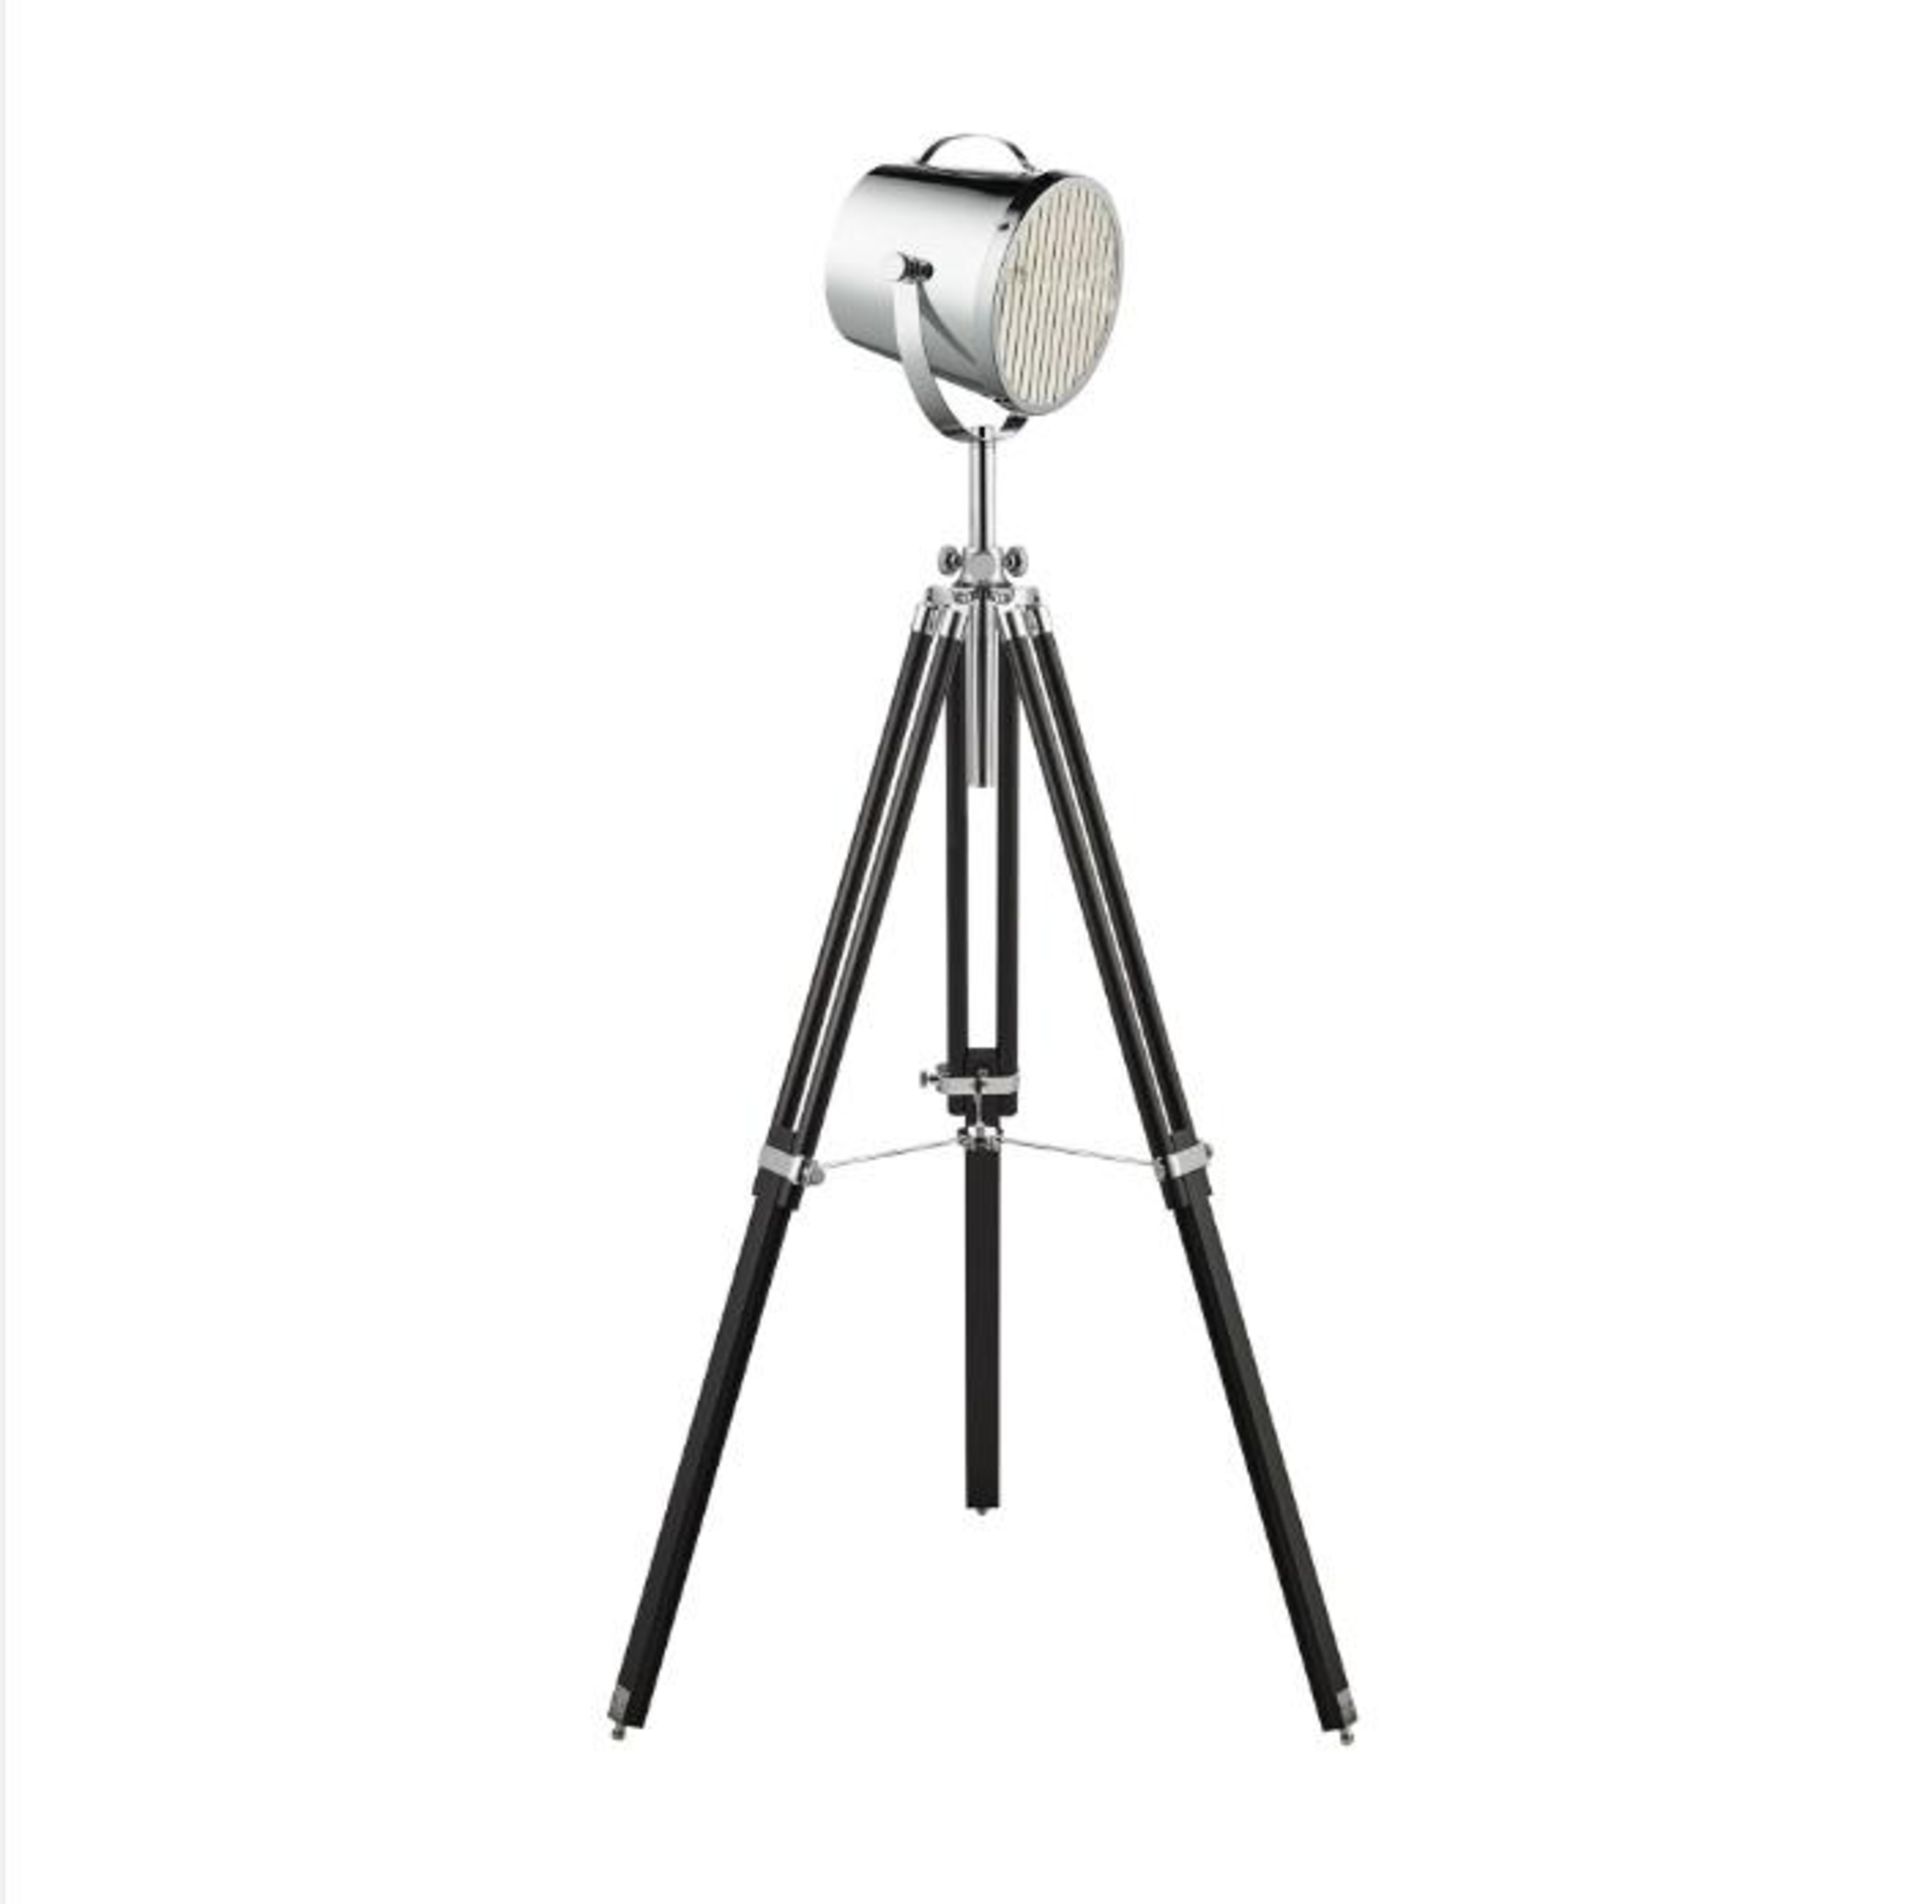 1 x Stage Light Black Floor Lamp With Stylish Chrome Shade - Brand New Boxed Stock -